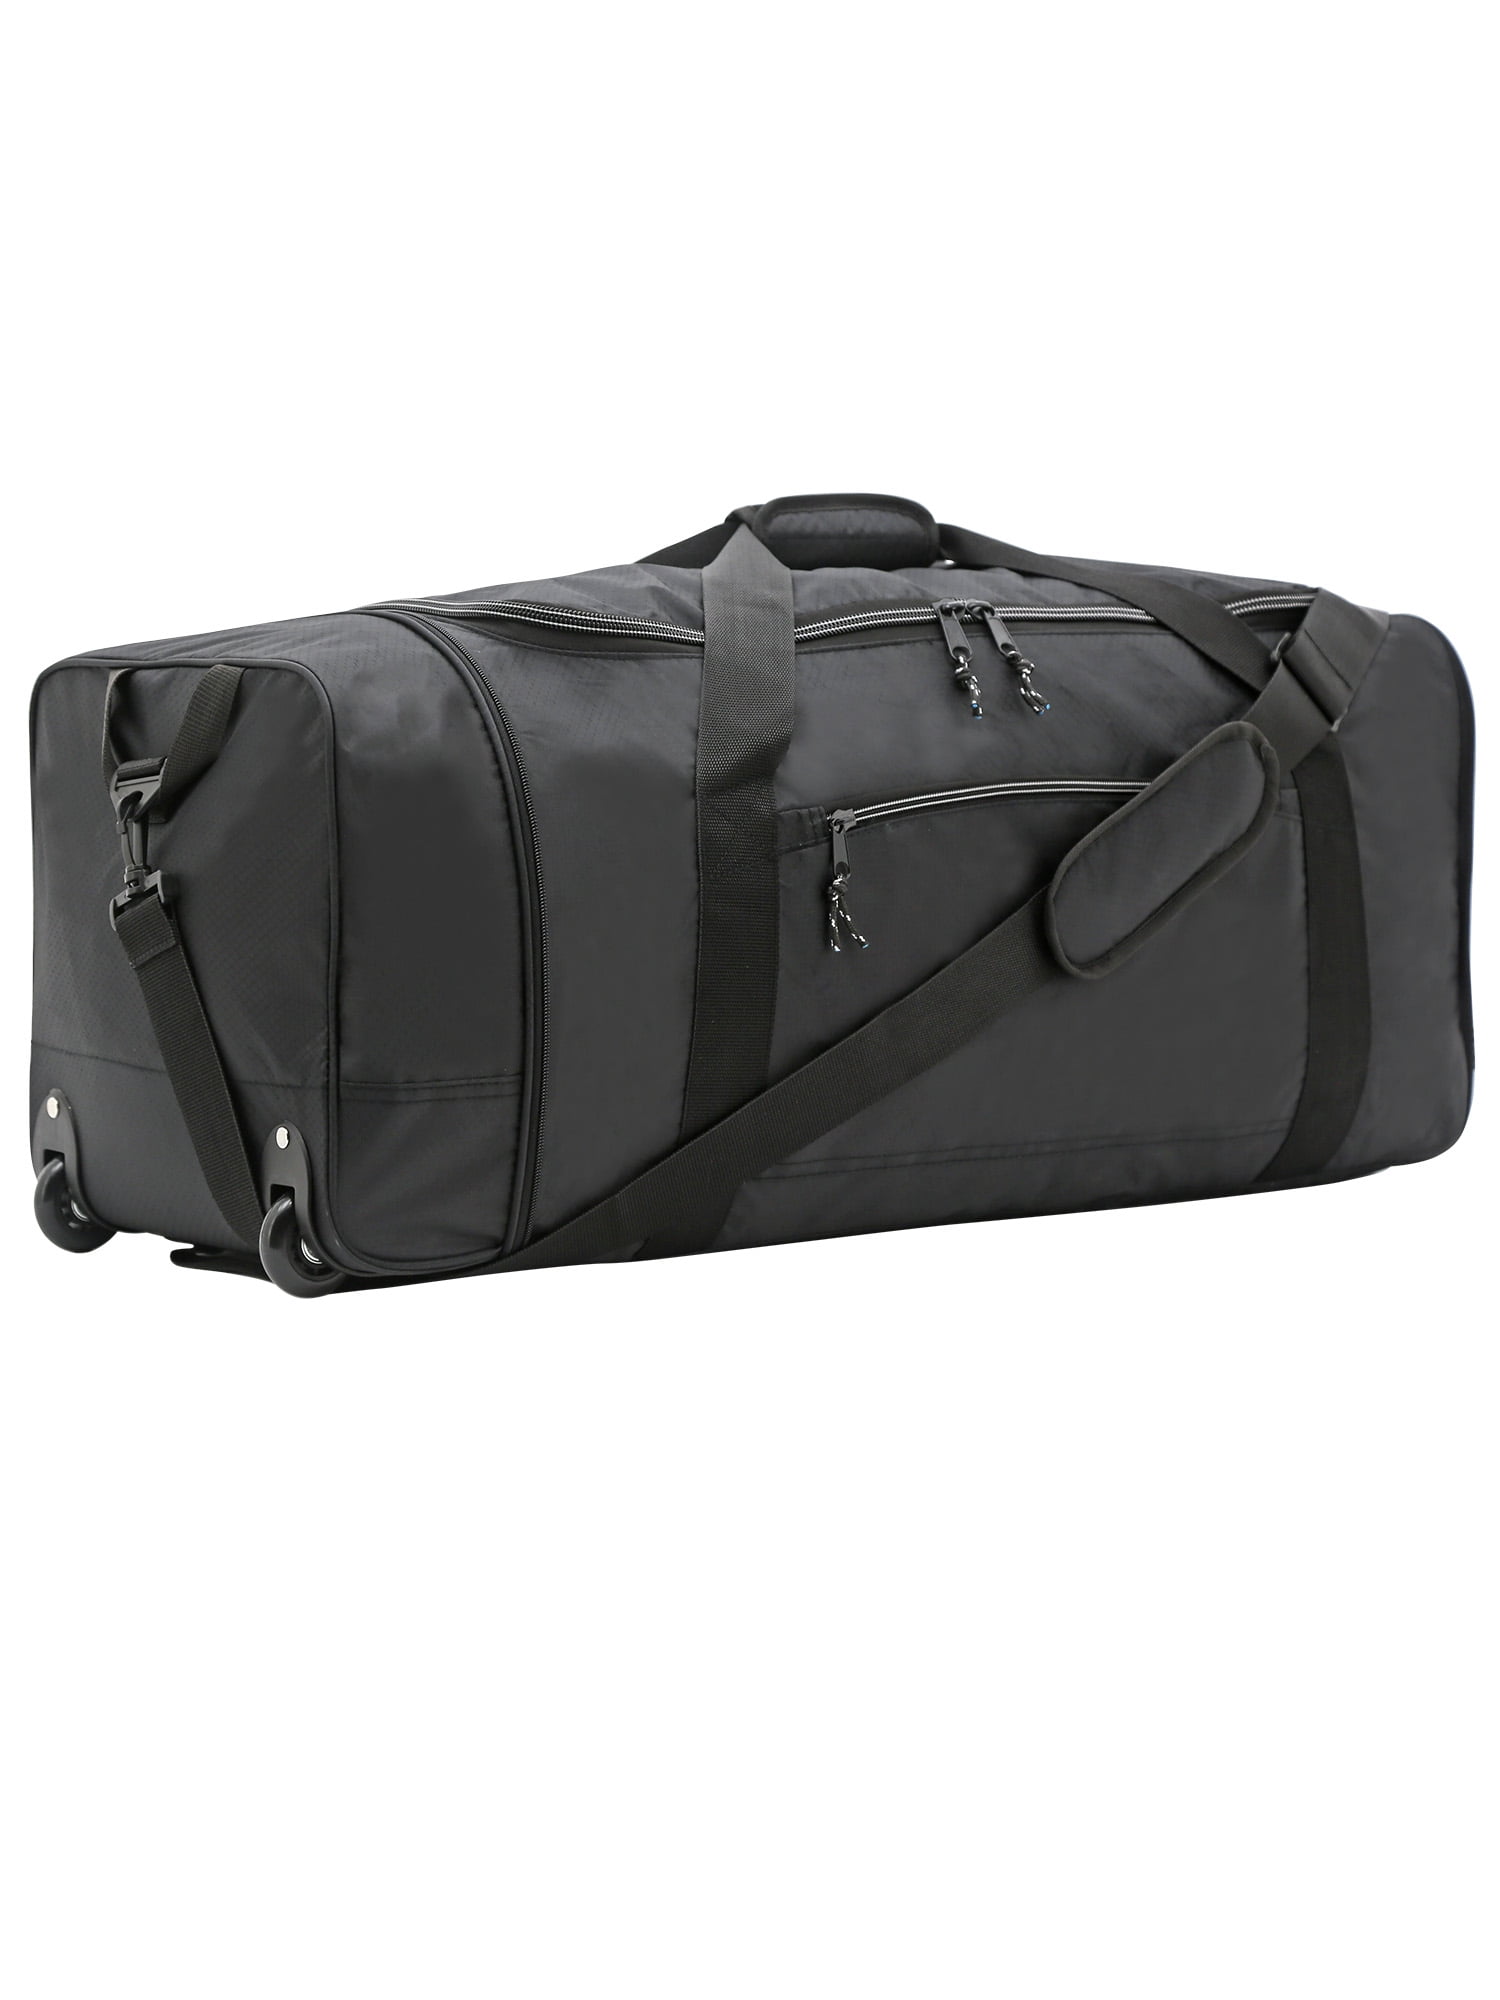 Heavy Duty Cargo Duffel Gym Bag Large Square Sport Gear Drum Set Luggage  Army Military Equipment Hardware Travel Bags Rooftop Rack Camping Bag 30  inch Black  Walmartcom